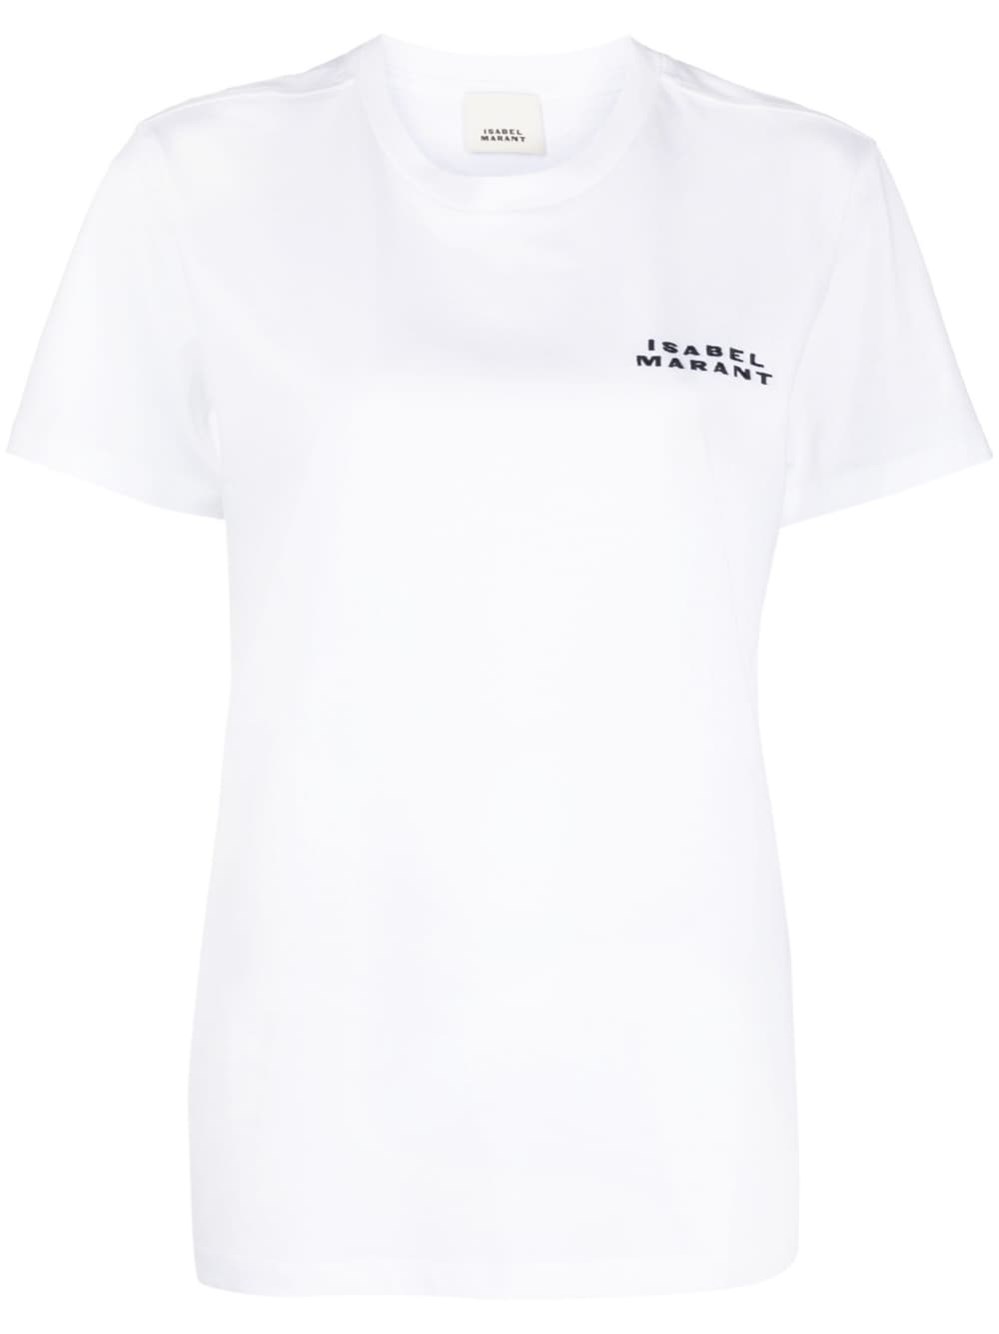 isabel marant LOGO T-SHIRT available on montiboutique.com - 54089